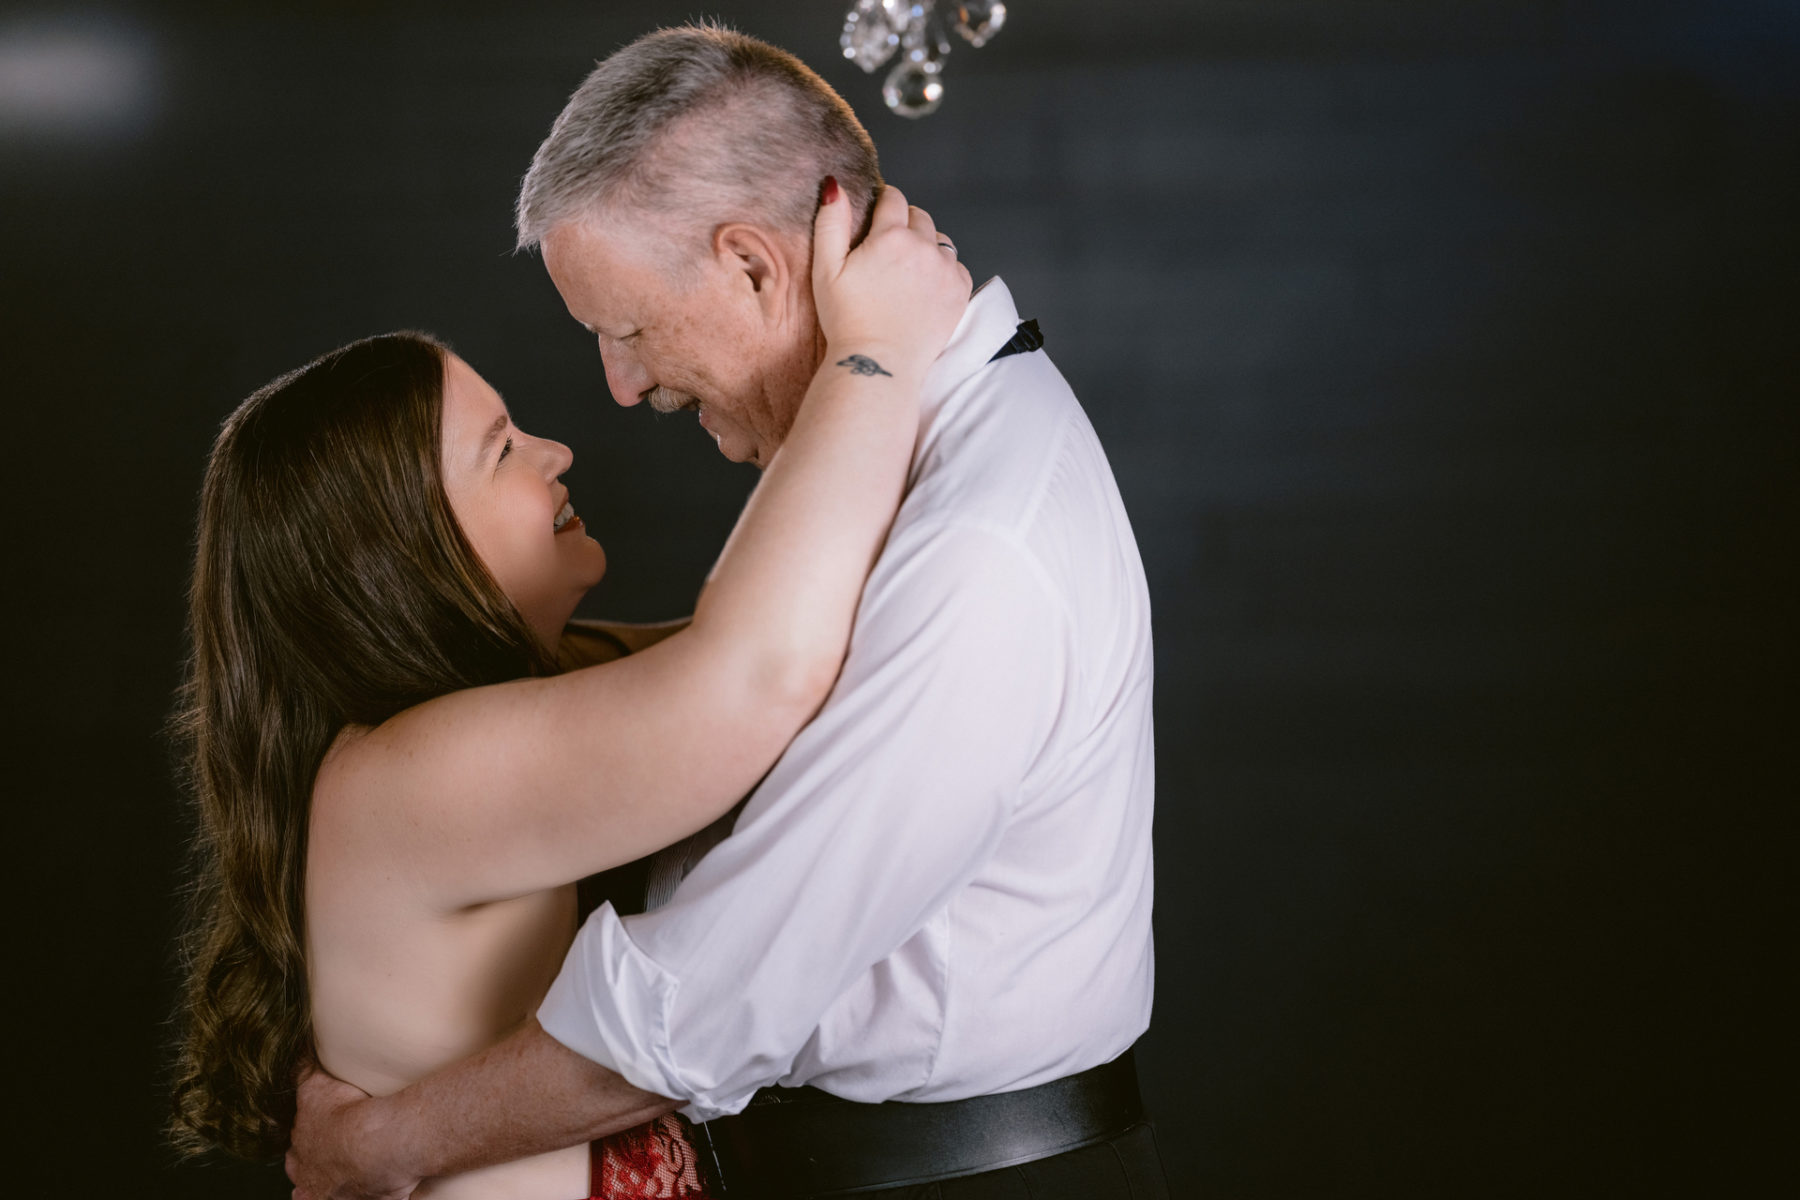 Loving couple embracing for an intimate boudoir session